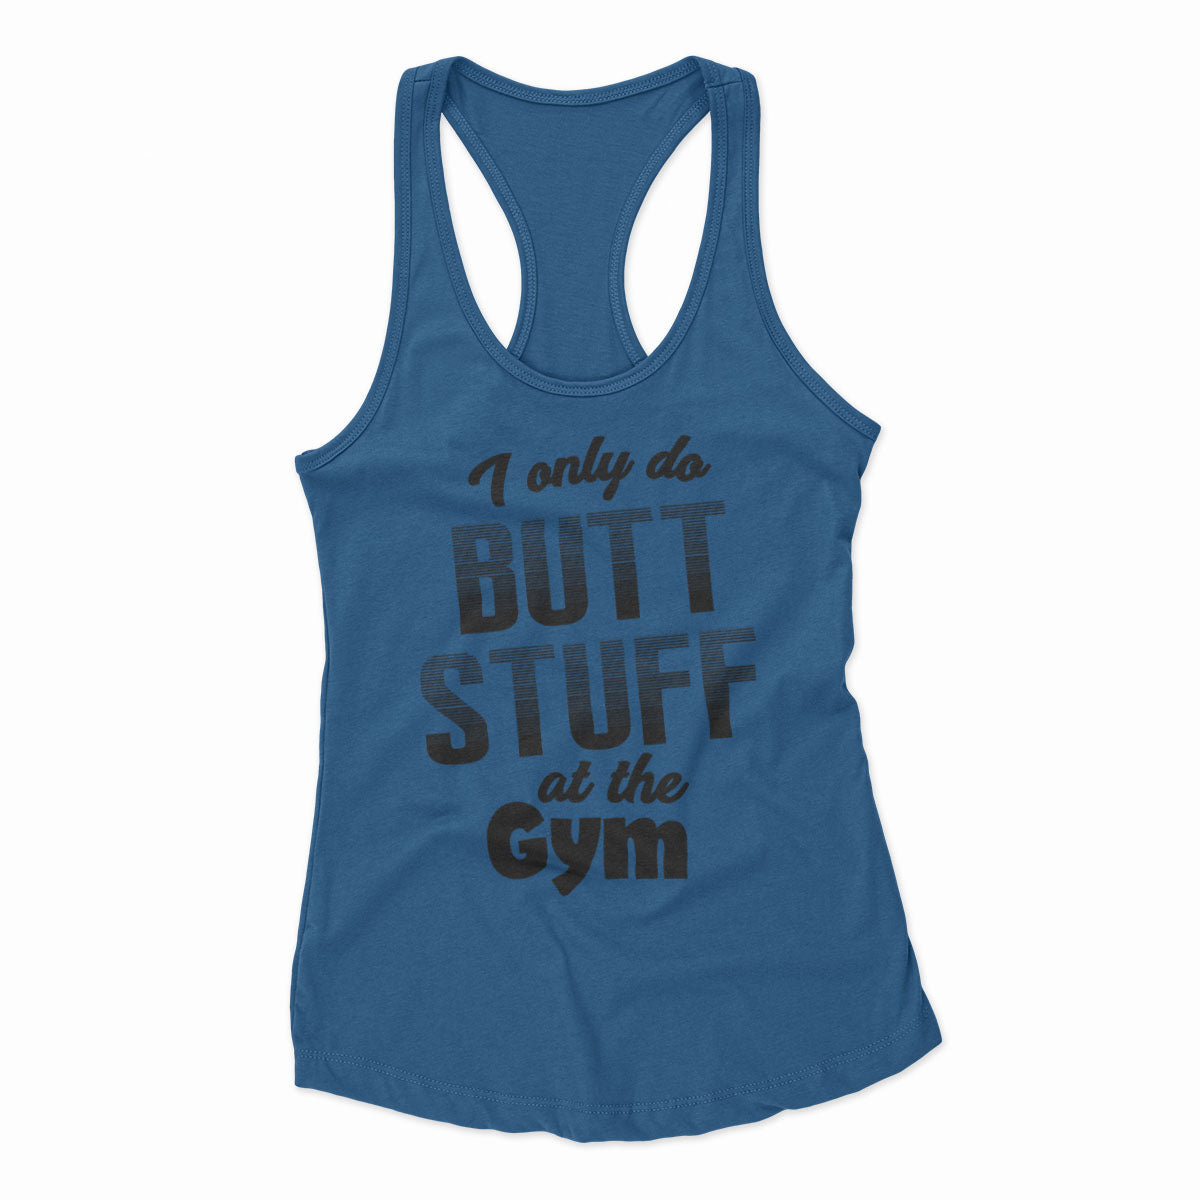 I Only Do Butt Stuff At The Gym